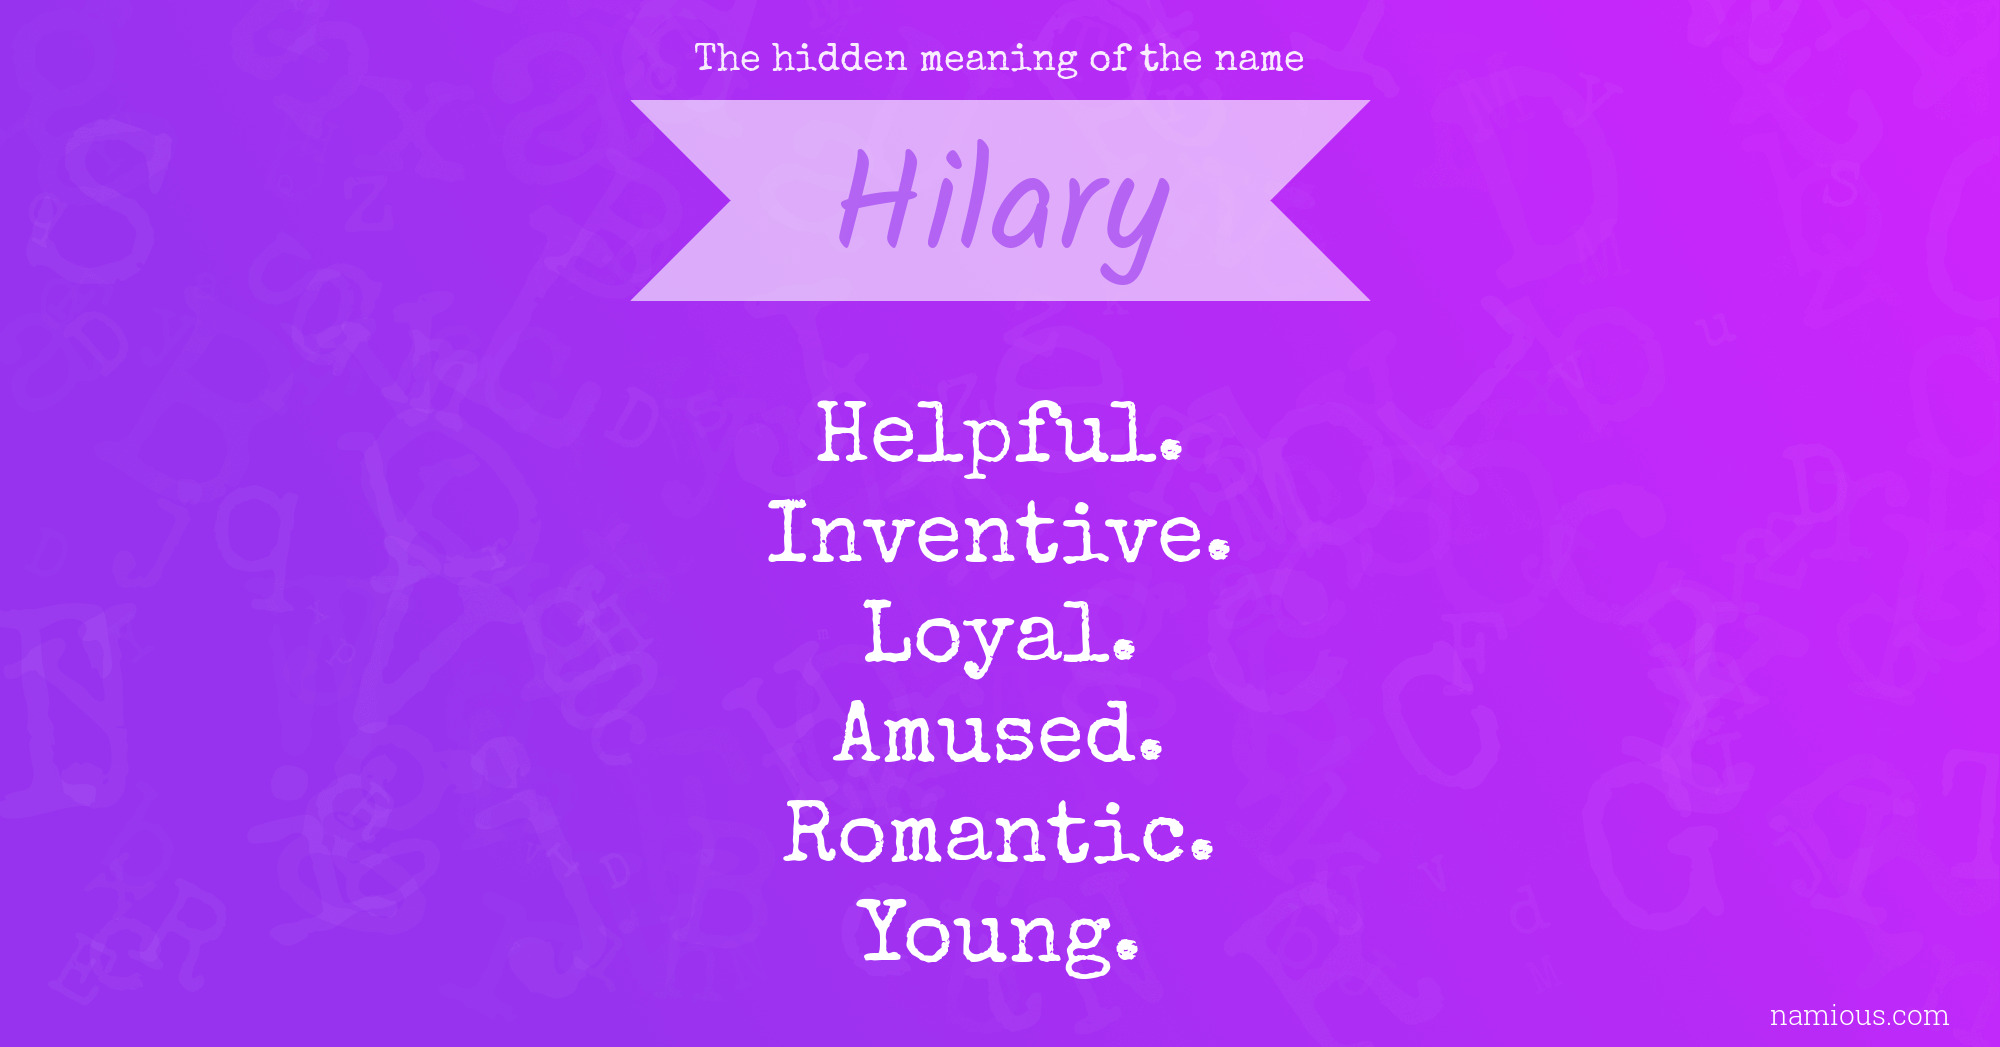 The hidden meaning of the name Hilary